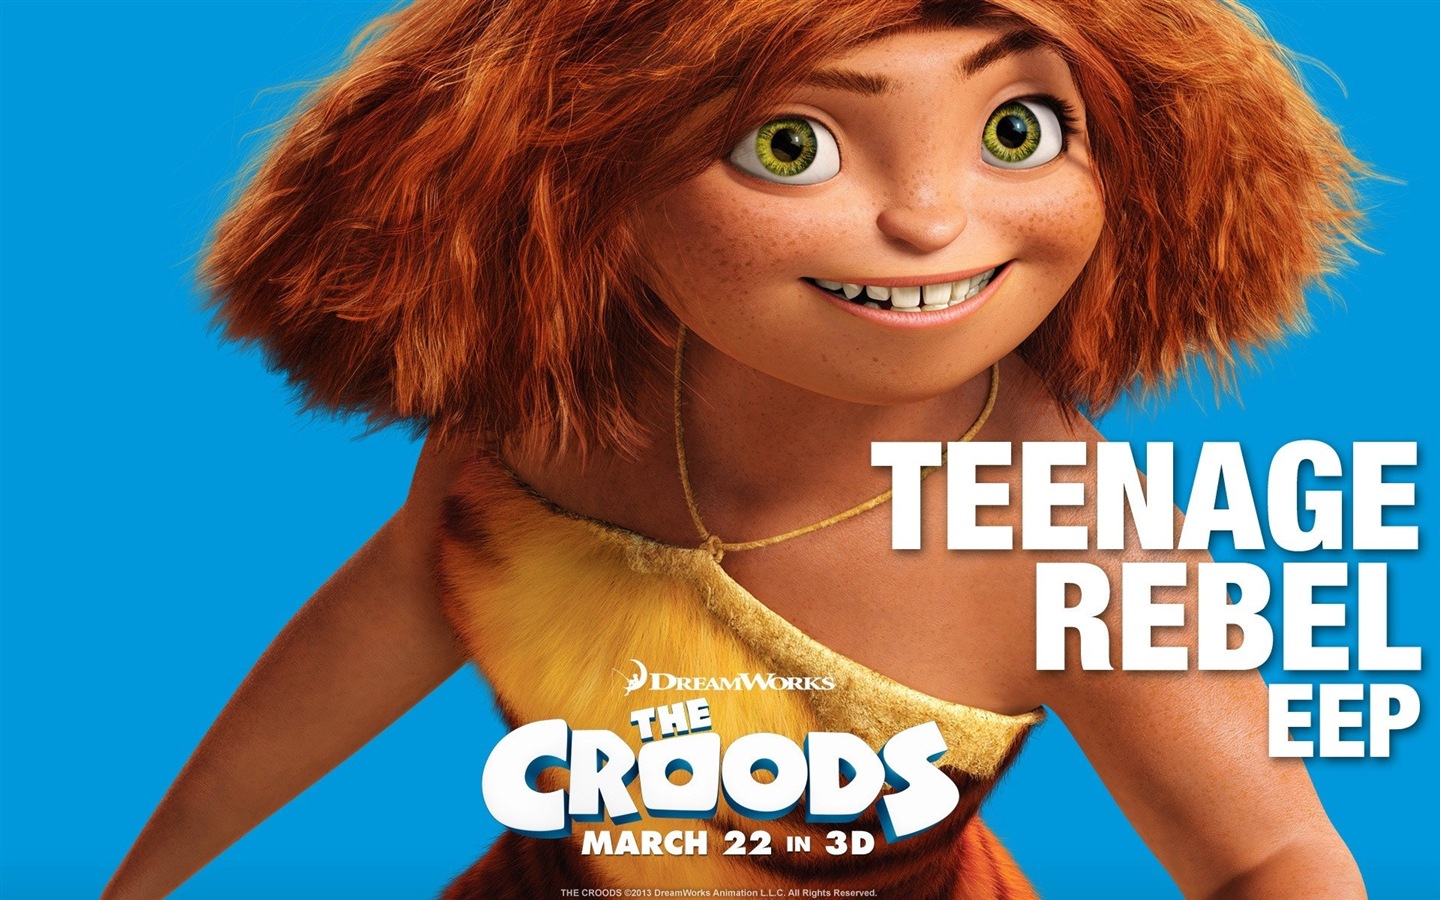 The Croods HD movie wallpapers #10 - 1440x900